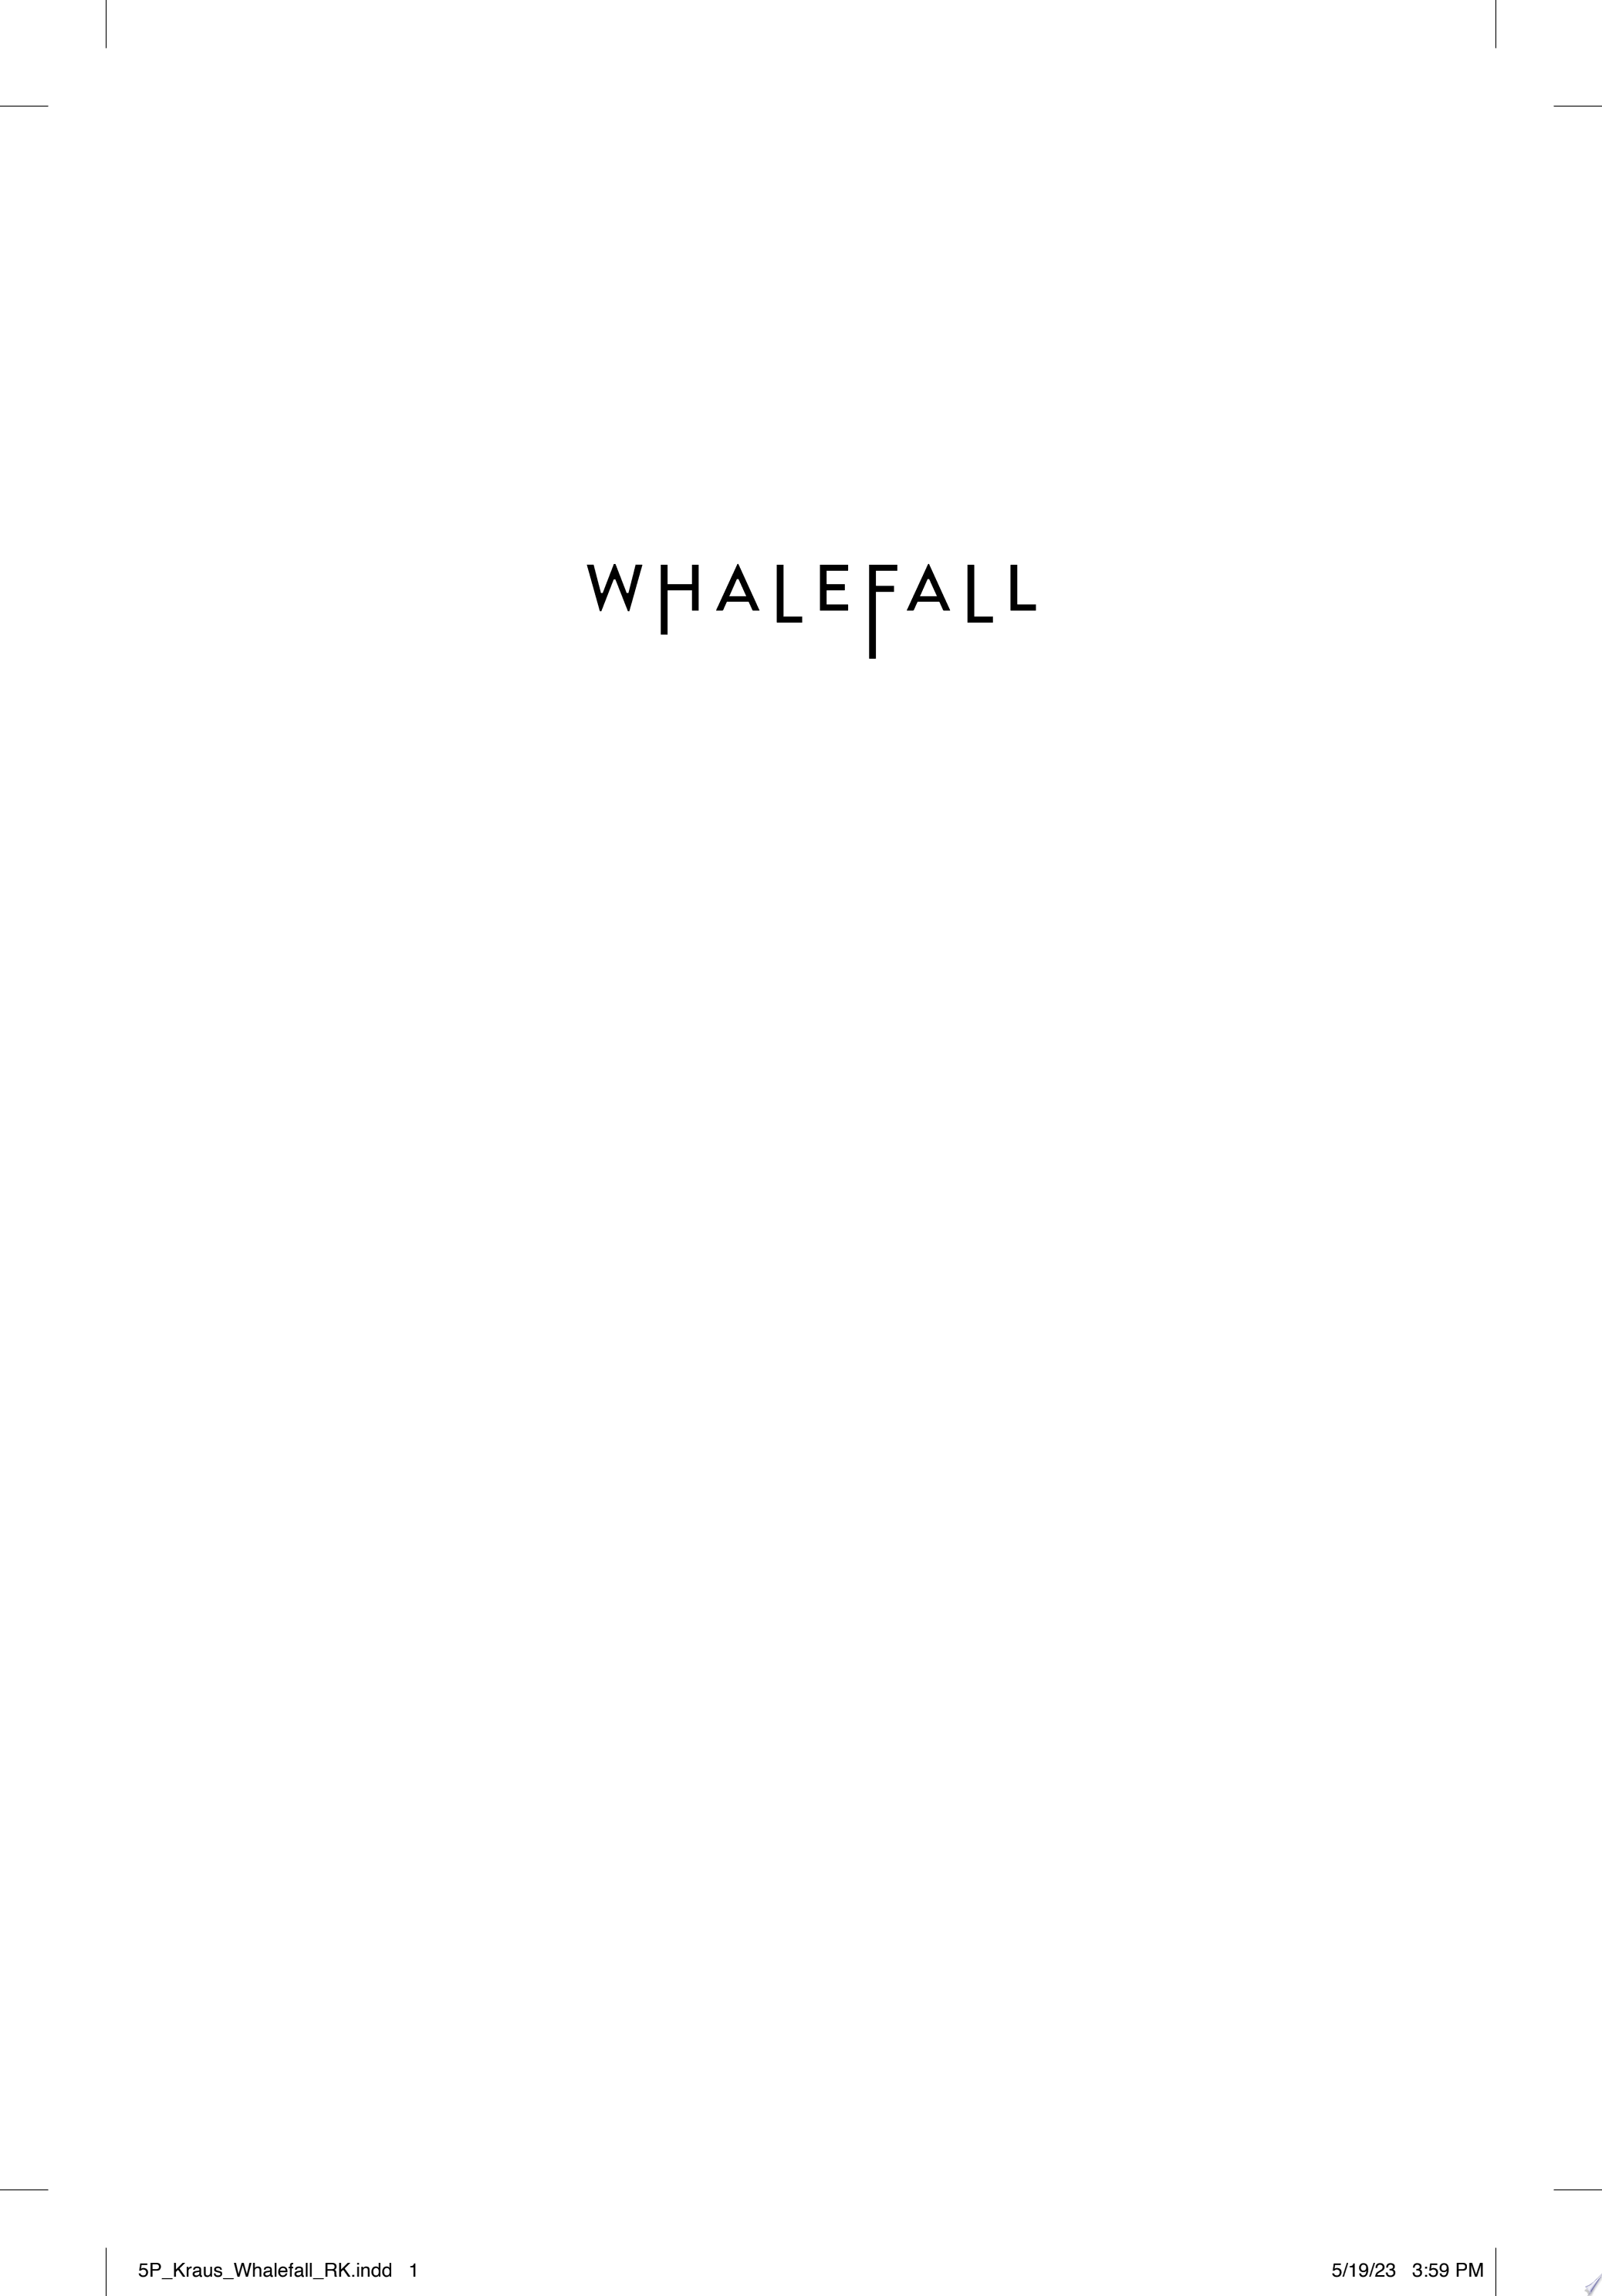 Image for "Whalefall"